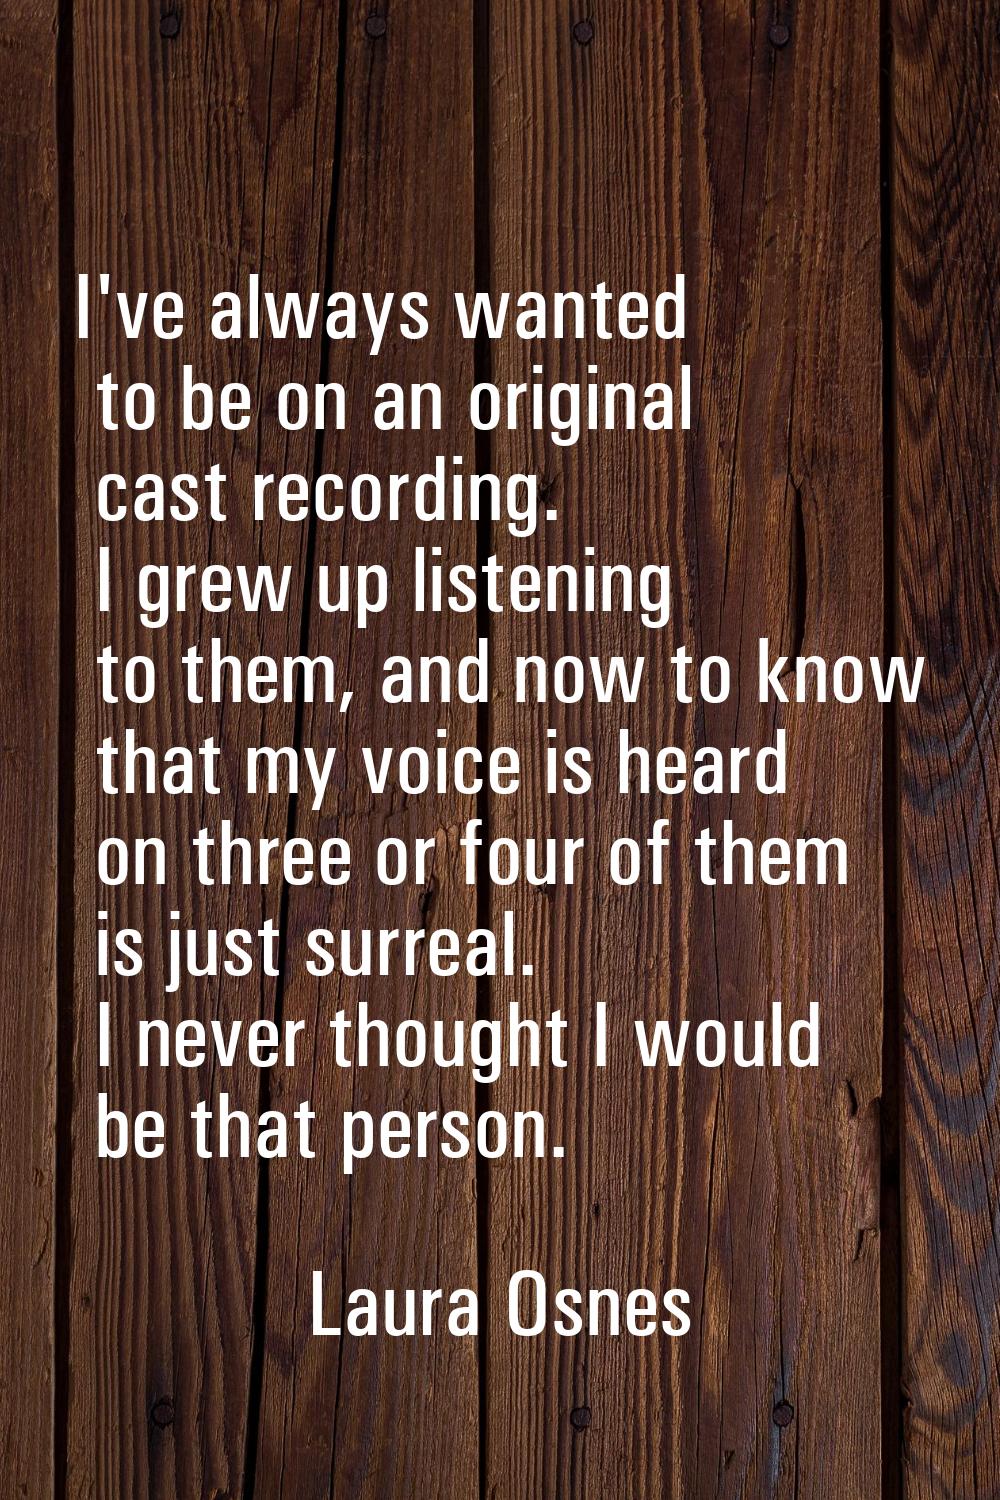 I've always wanted to be on an original cast recording. I grew up listening to them, and now to kno